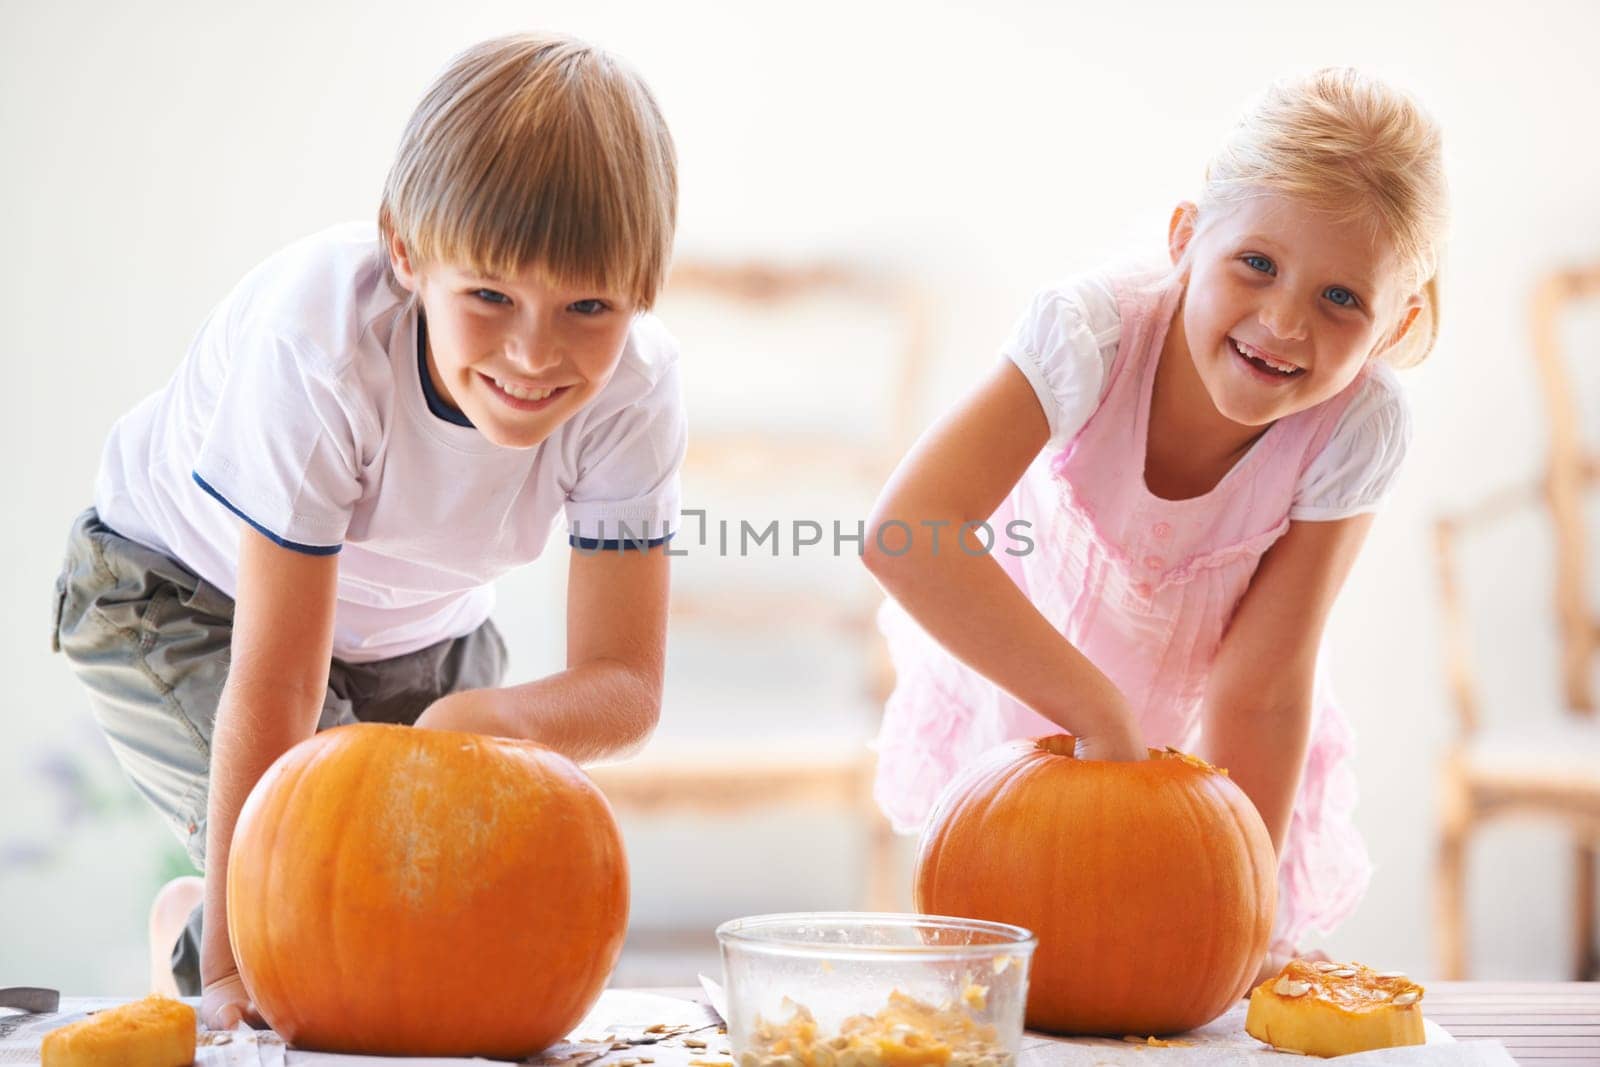 Halloween, portrait and carving a pumpkin with children at a home table for fun and bonding. Boy and girl or young kids as siblings together for creativity, holiday lantern and happy craft and play.